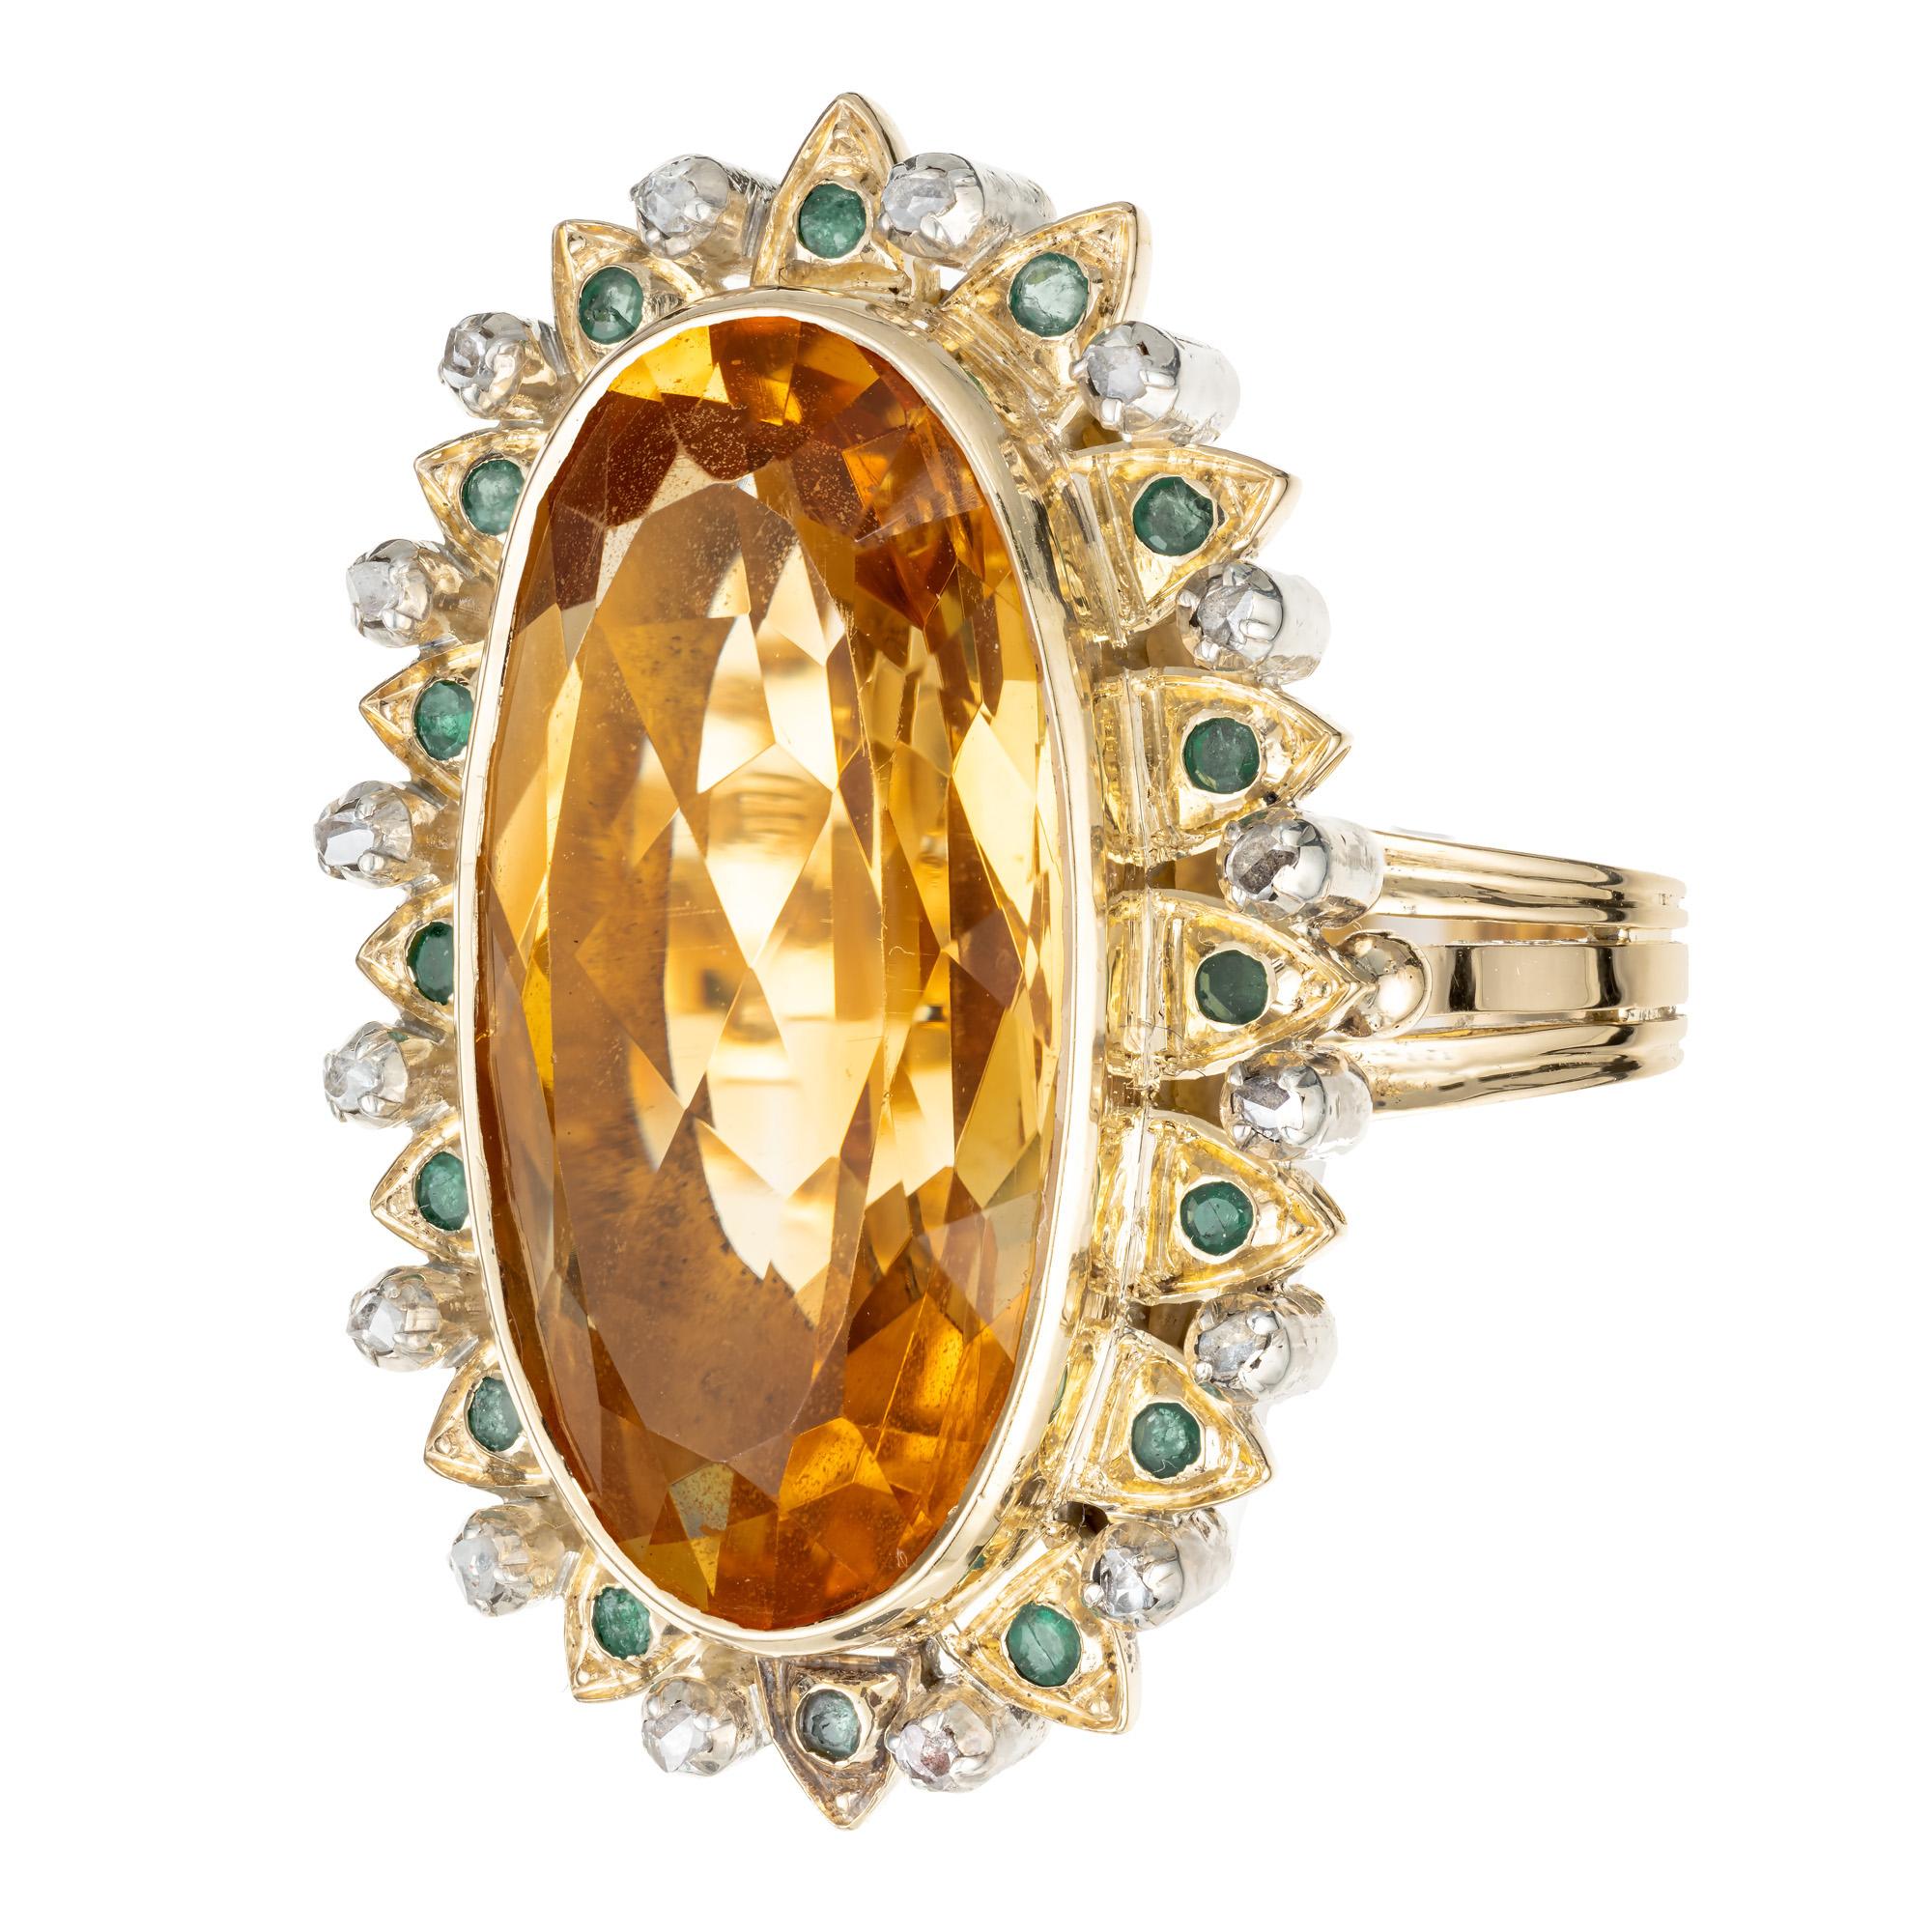 Citrine, emerald and diamond handmade cocktail ring. Oval yellow 20.00ct center citrine. Set in 18k yellow gold with a halo of round cut emeralds and diamonds. Circa 1910 to 1920.

1 genuine yellow Citrine, approx. total weight 20.00cts, VS, 25 x